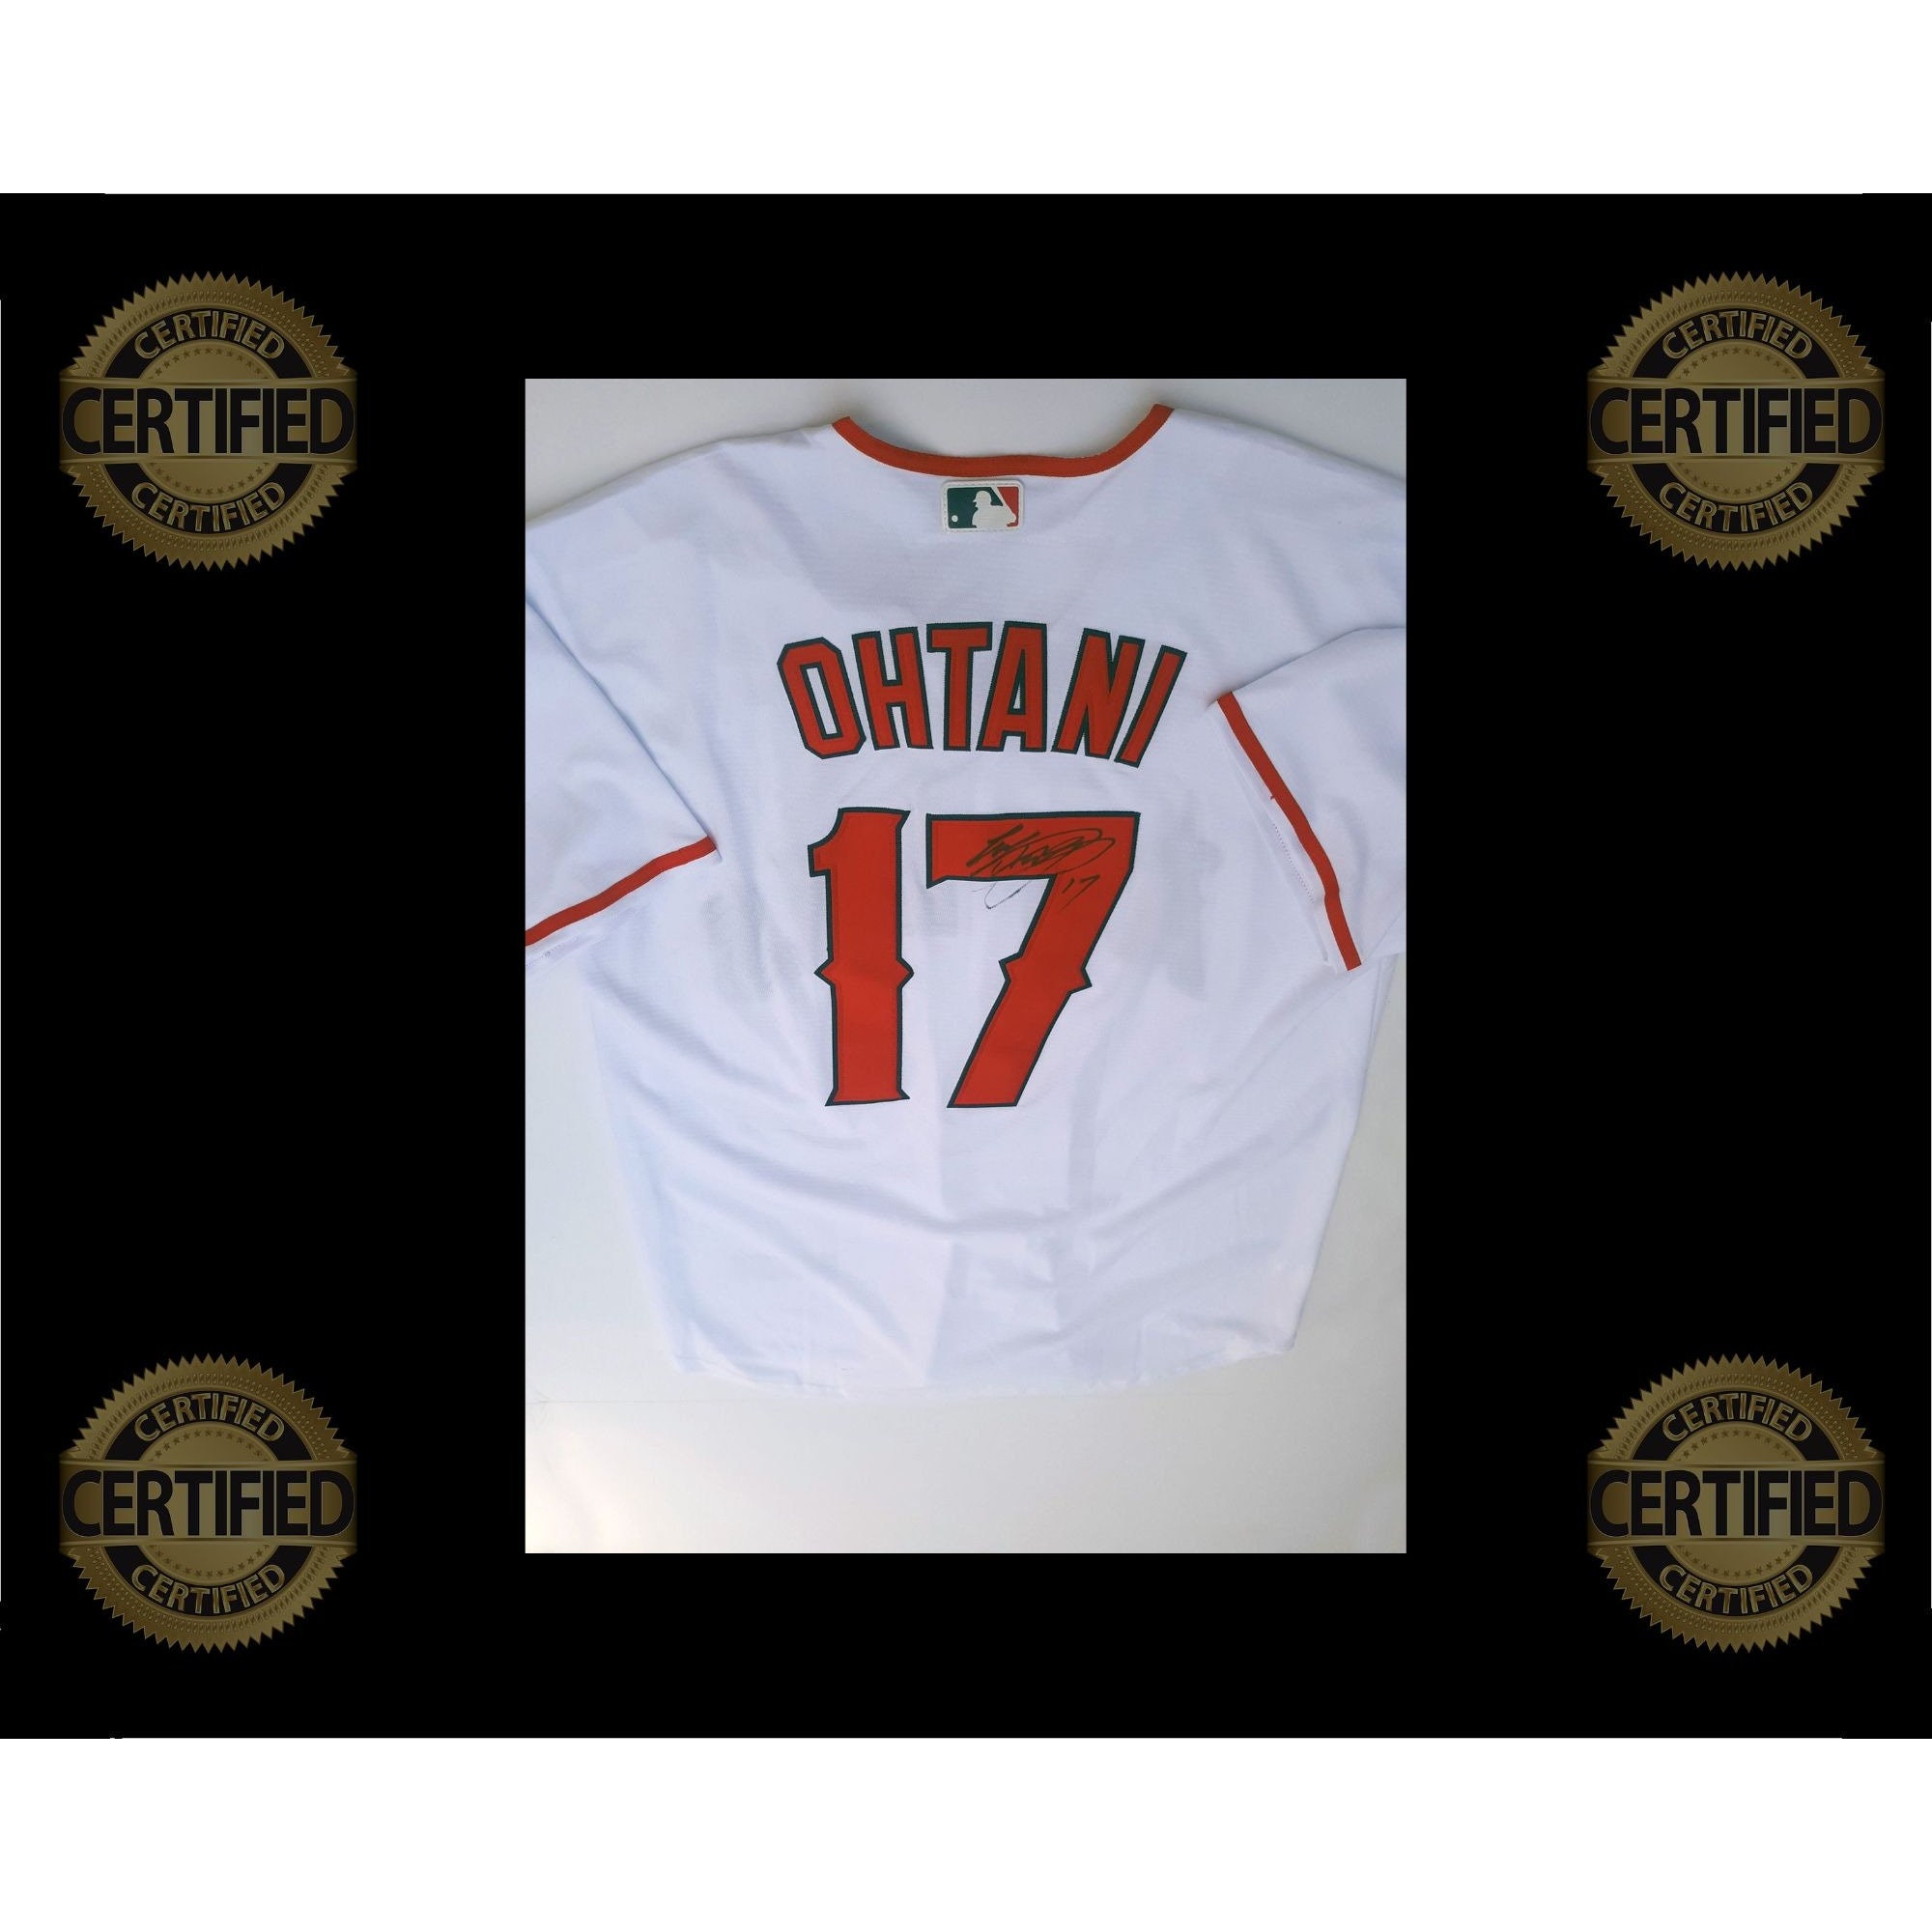 2023 MLB All Star Game Shohei Ohtani Jersey Nike Authentic In Hand! Size 44